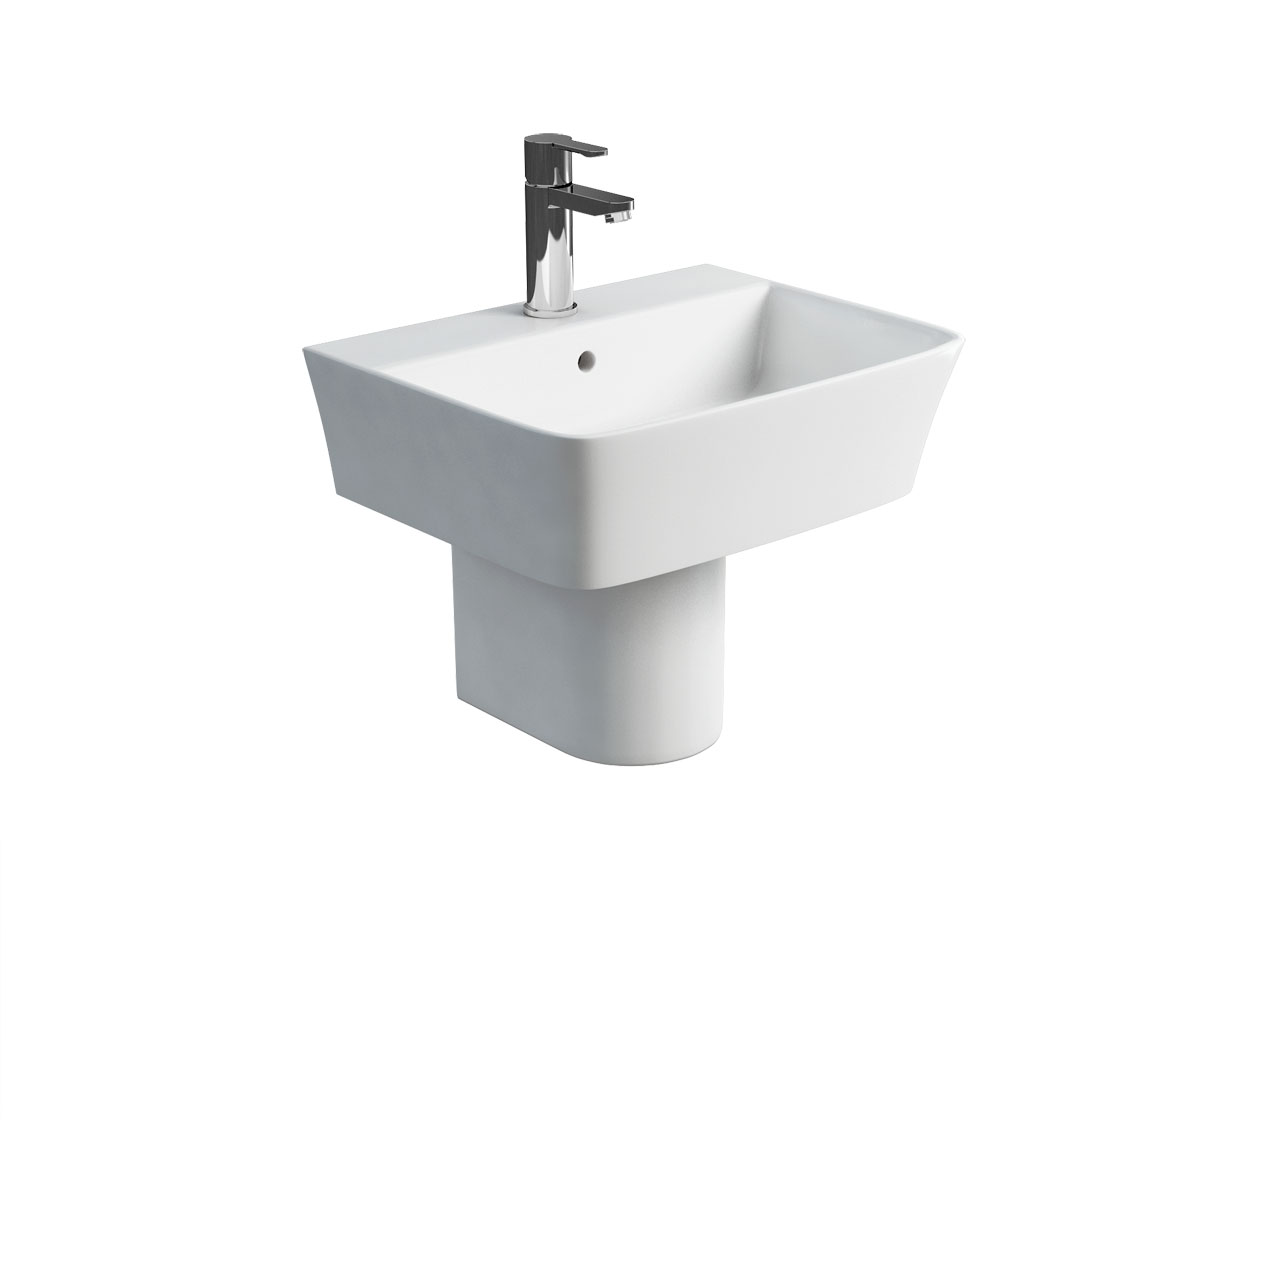 Fine S40 500 basin and round fronted semi pedestal